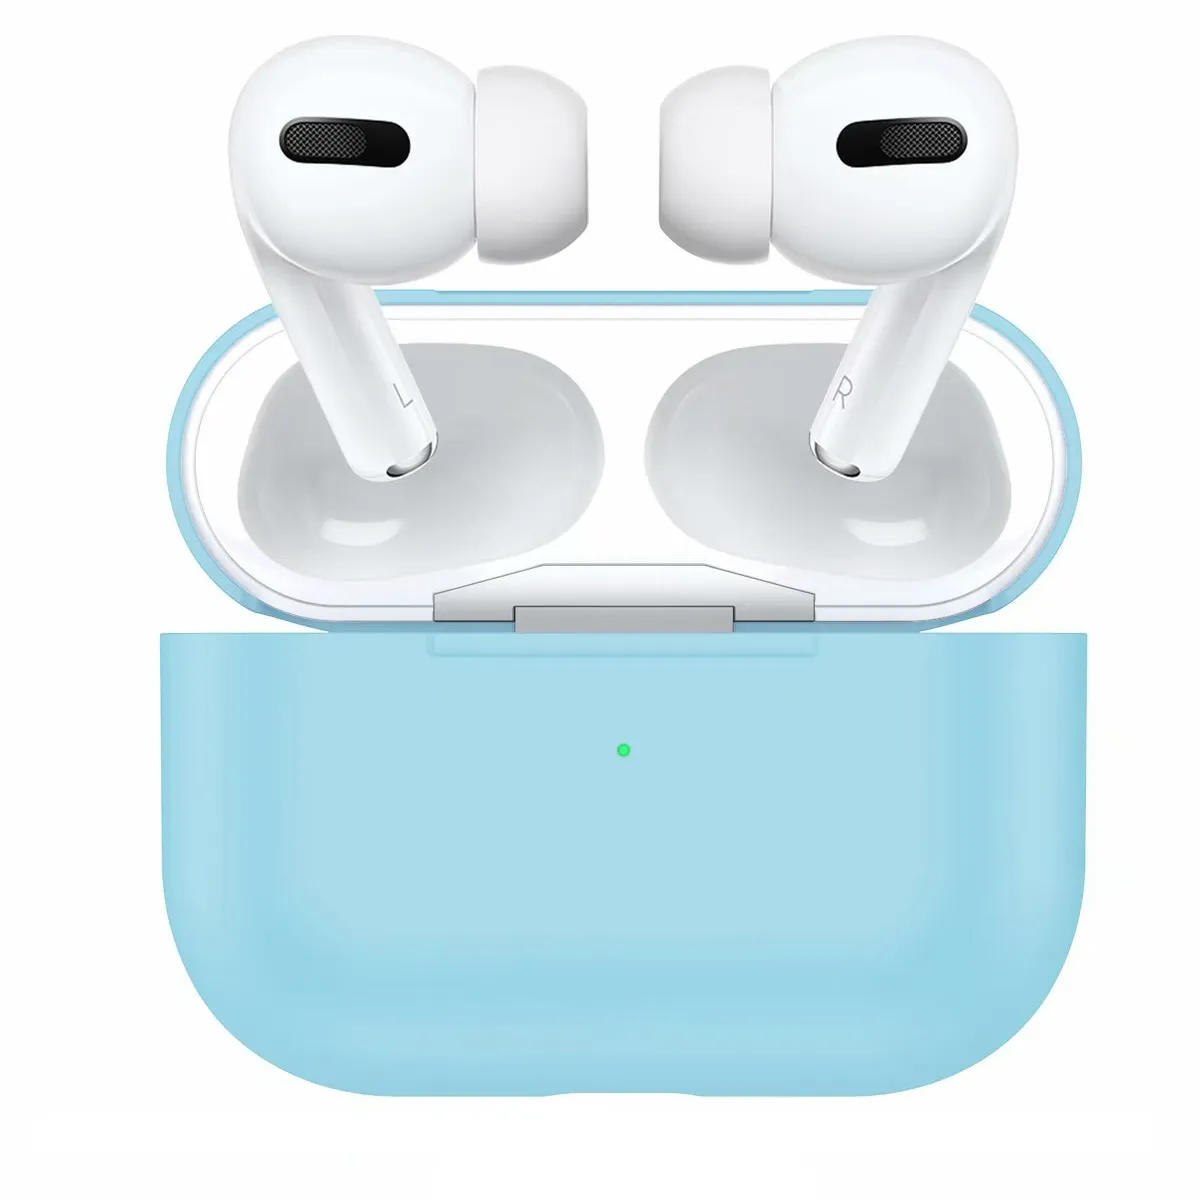 Buy Earpods pro Silicone Case Cover at best pirce in Pakistan | Rhizmall.pk